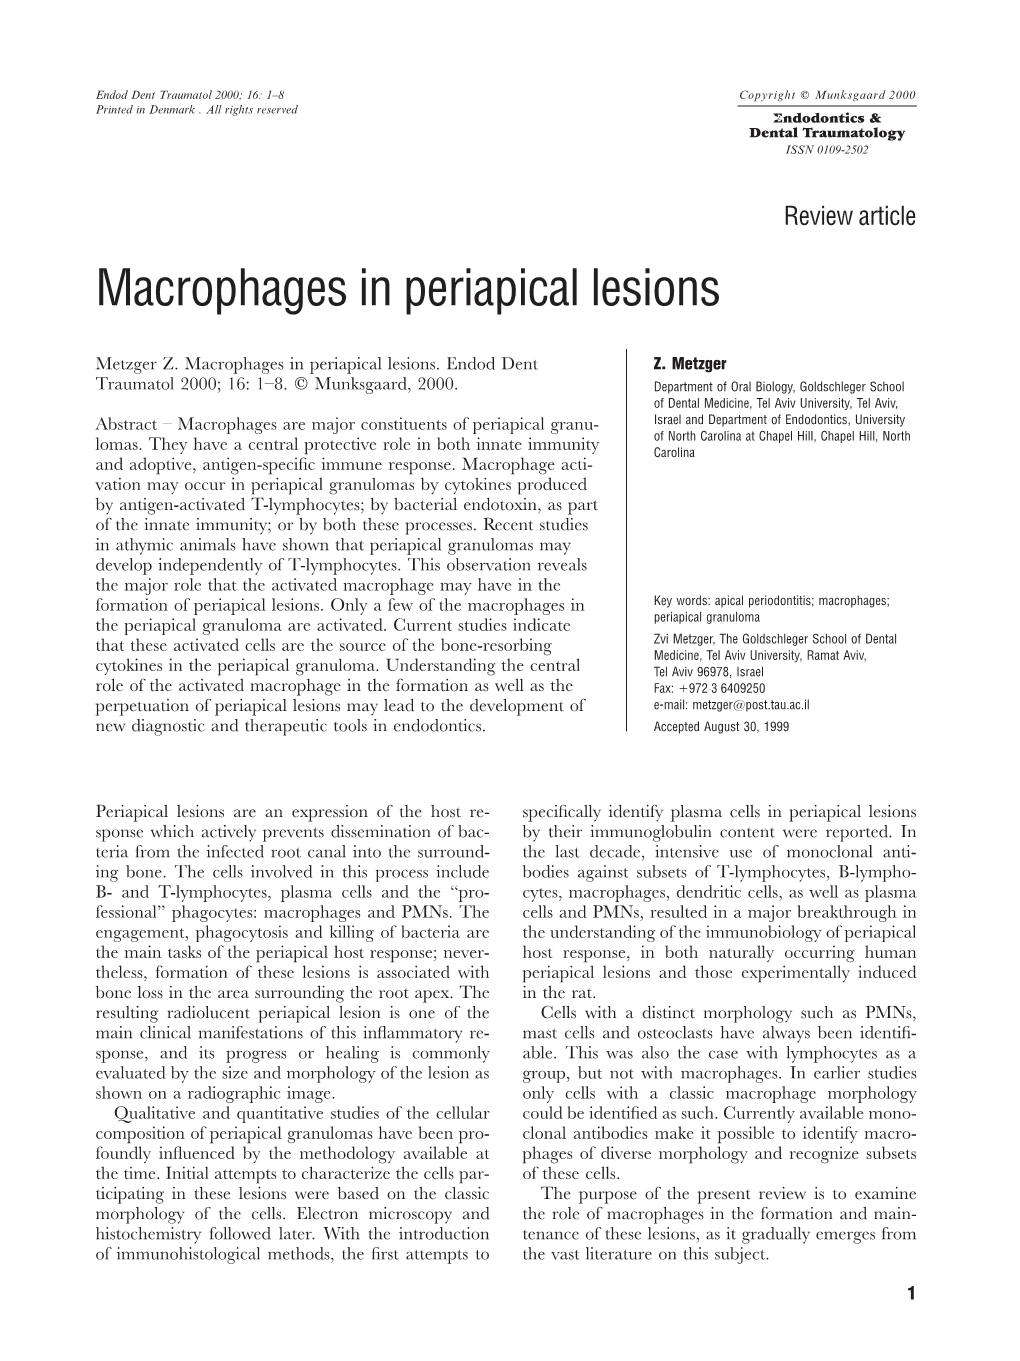 Macrophages in Periapical Lesions